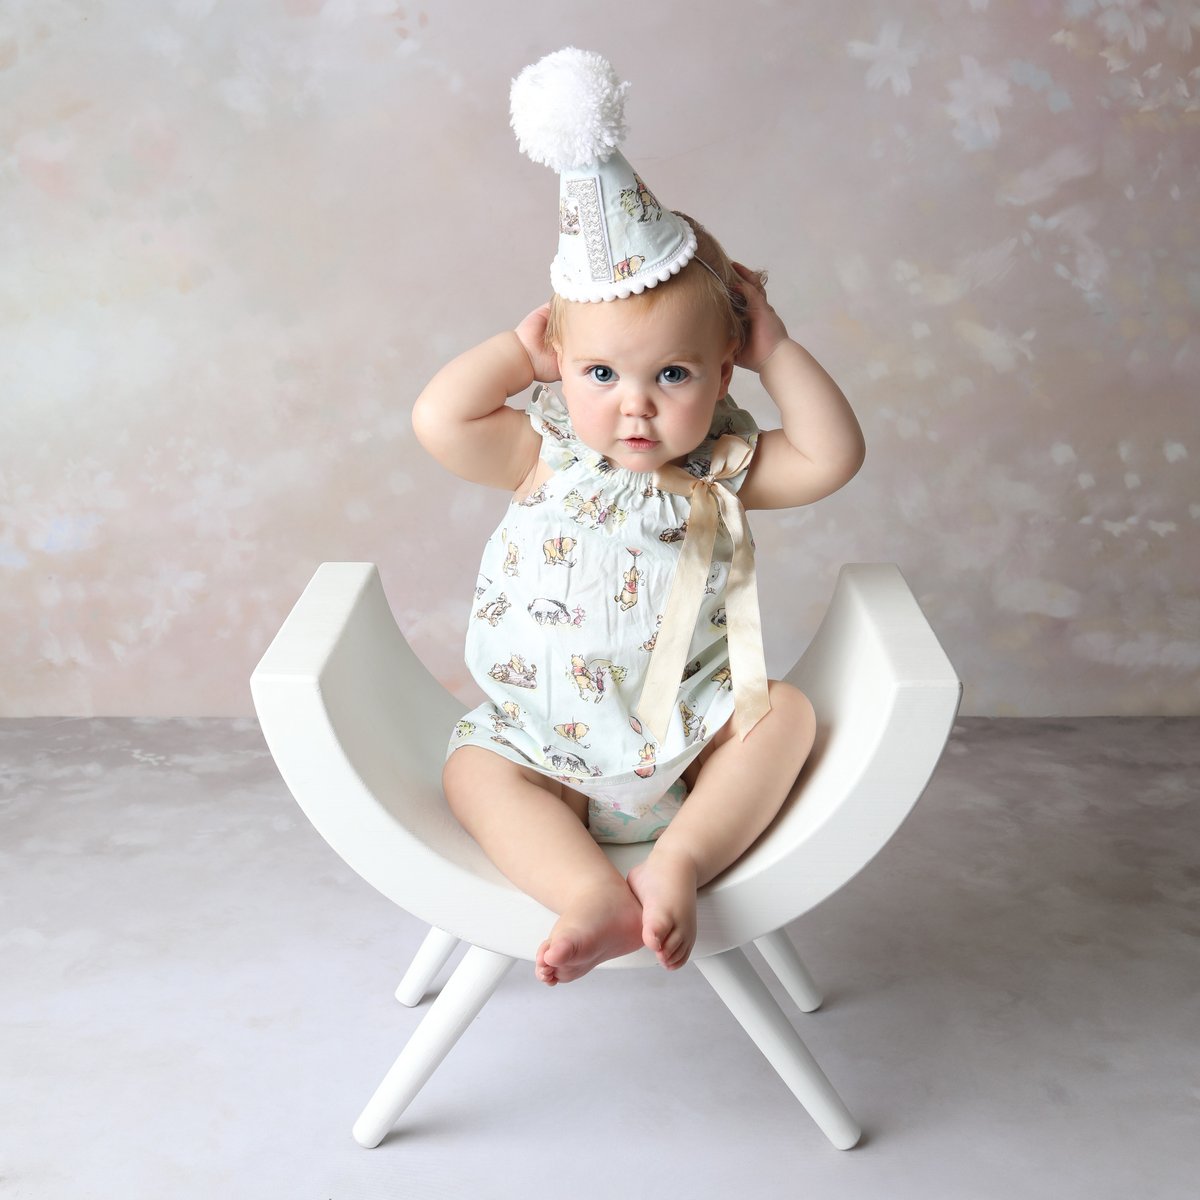 baby wearing a cute hat sitting on a chair for a photoshoot